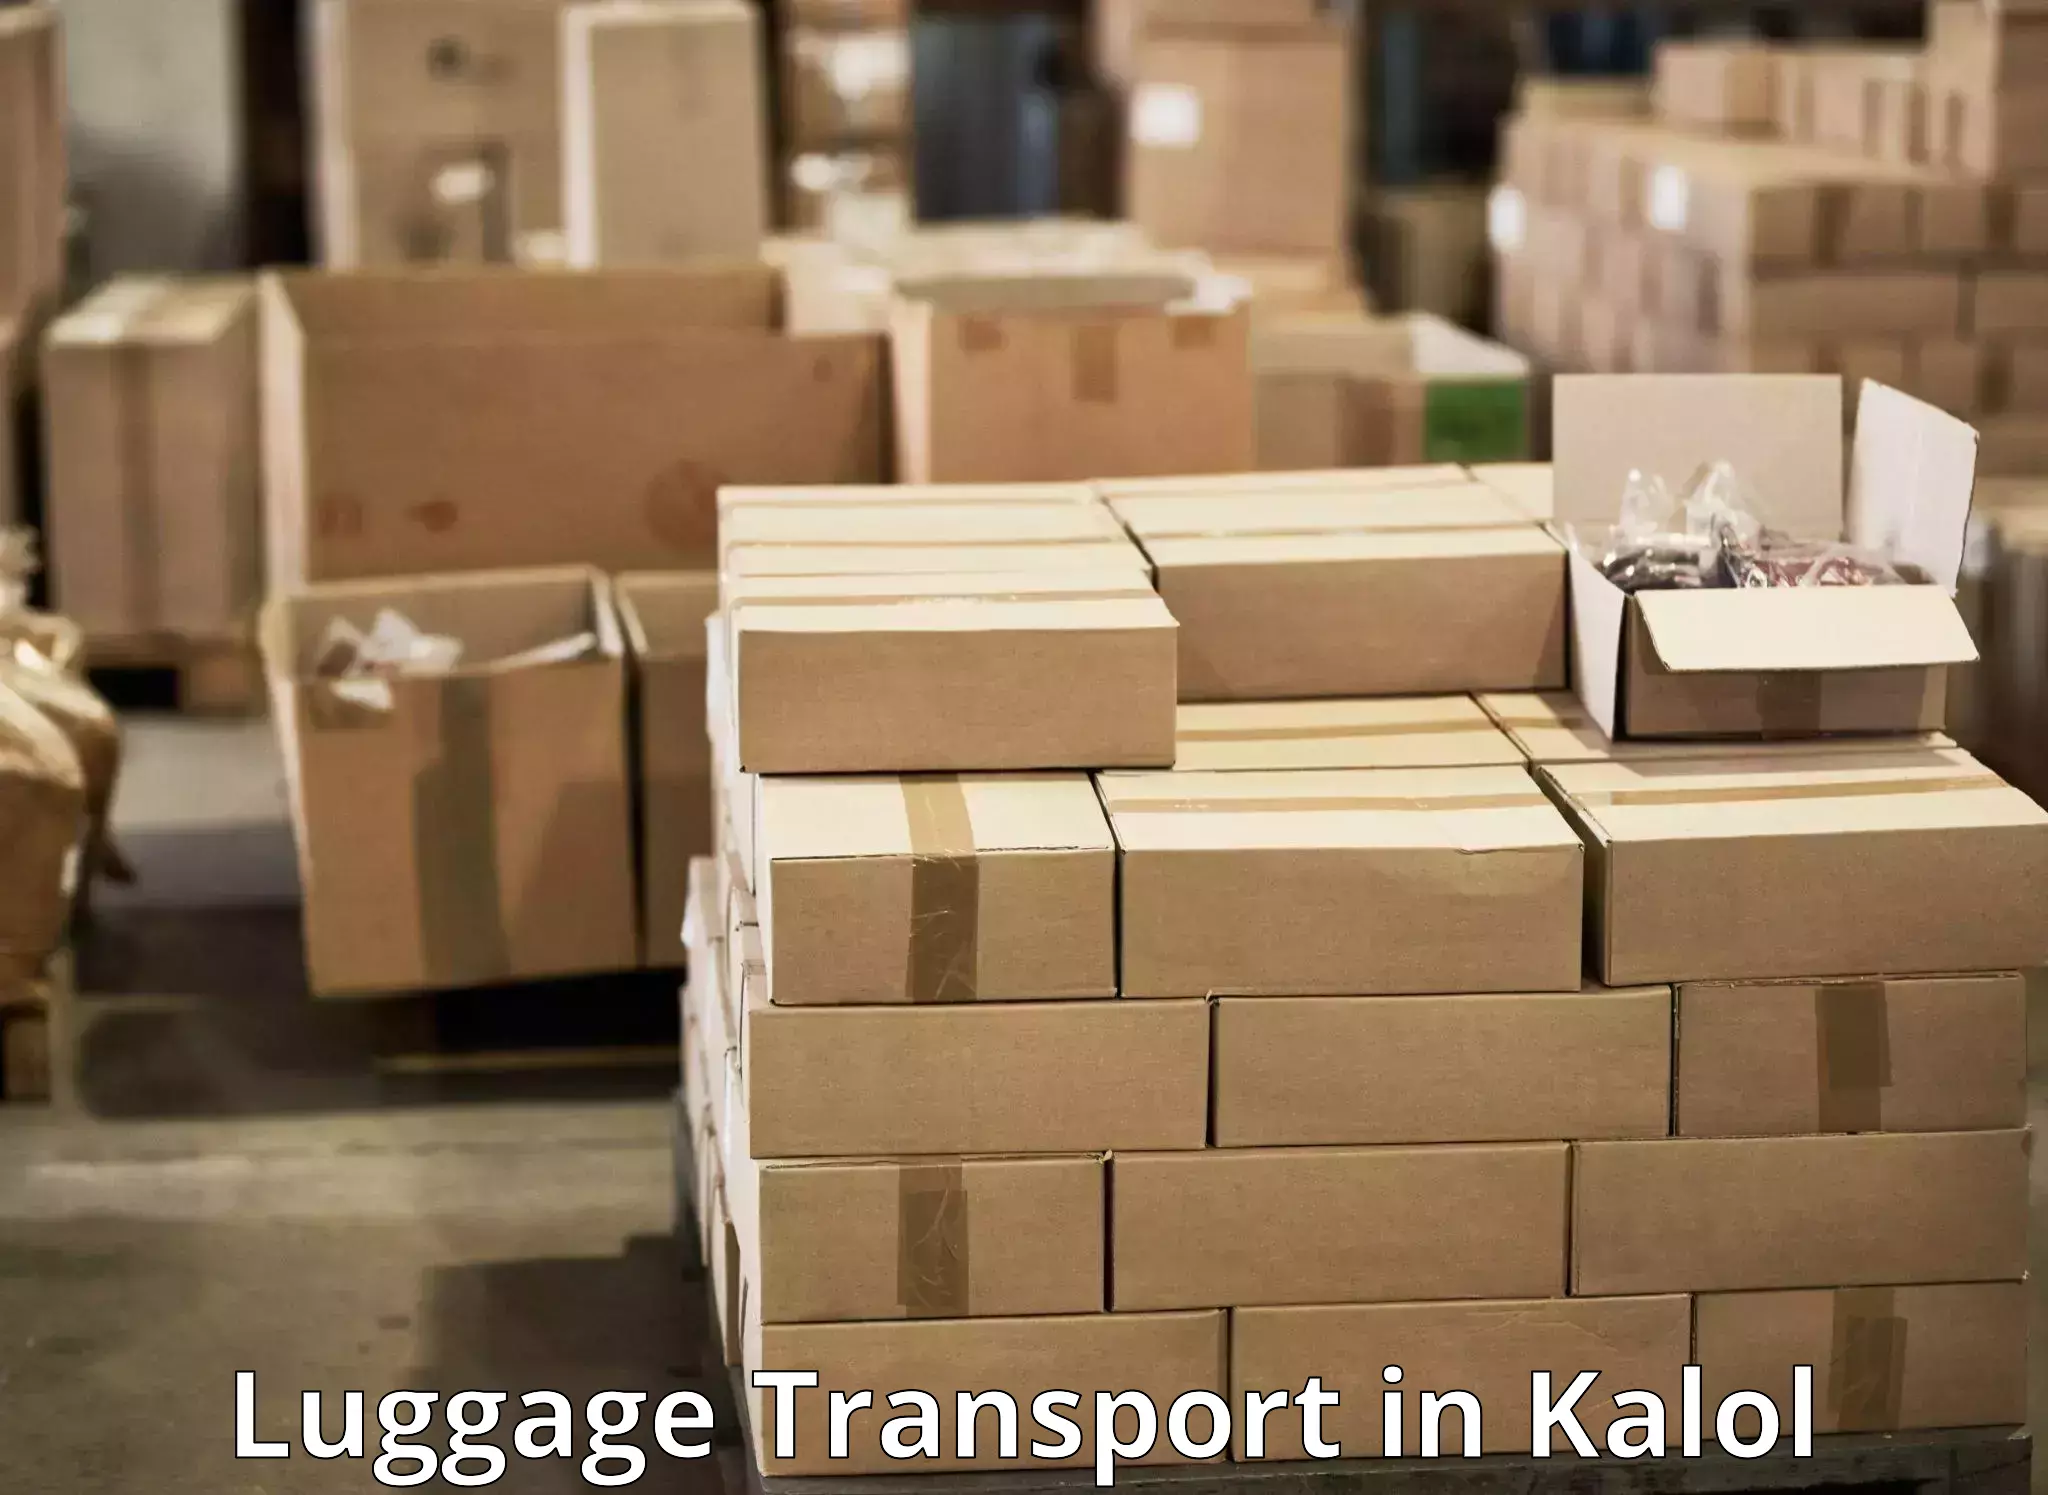 Express luggage delivery in Kalol